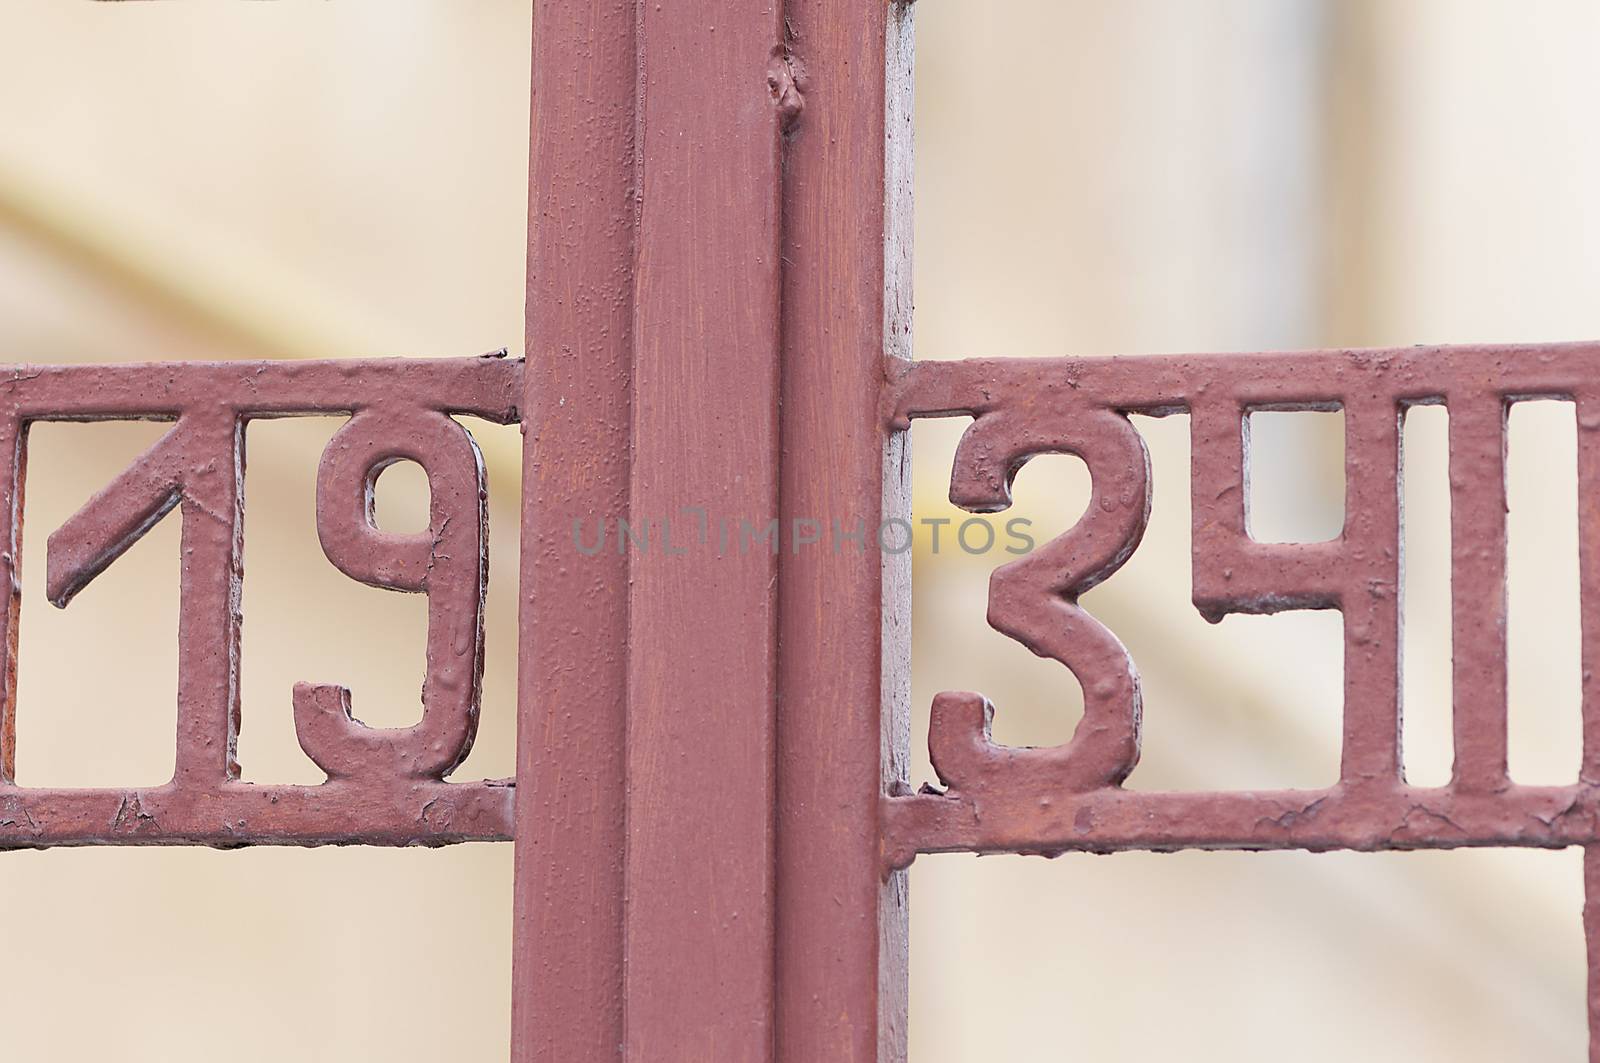 Number 1934 on gate. Decoration on a fence. Exterior